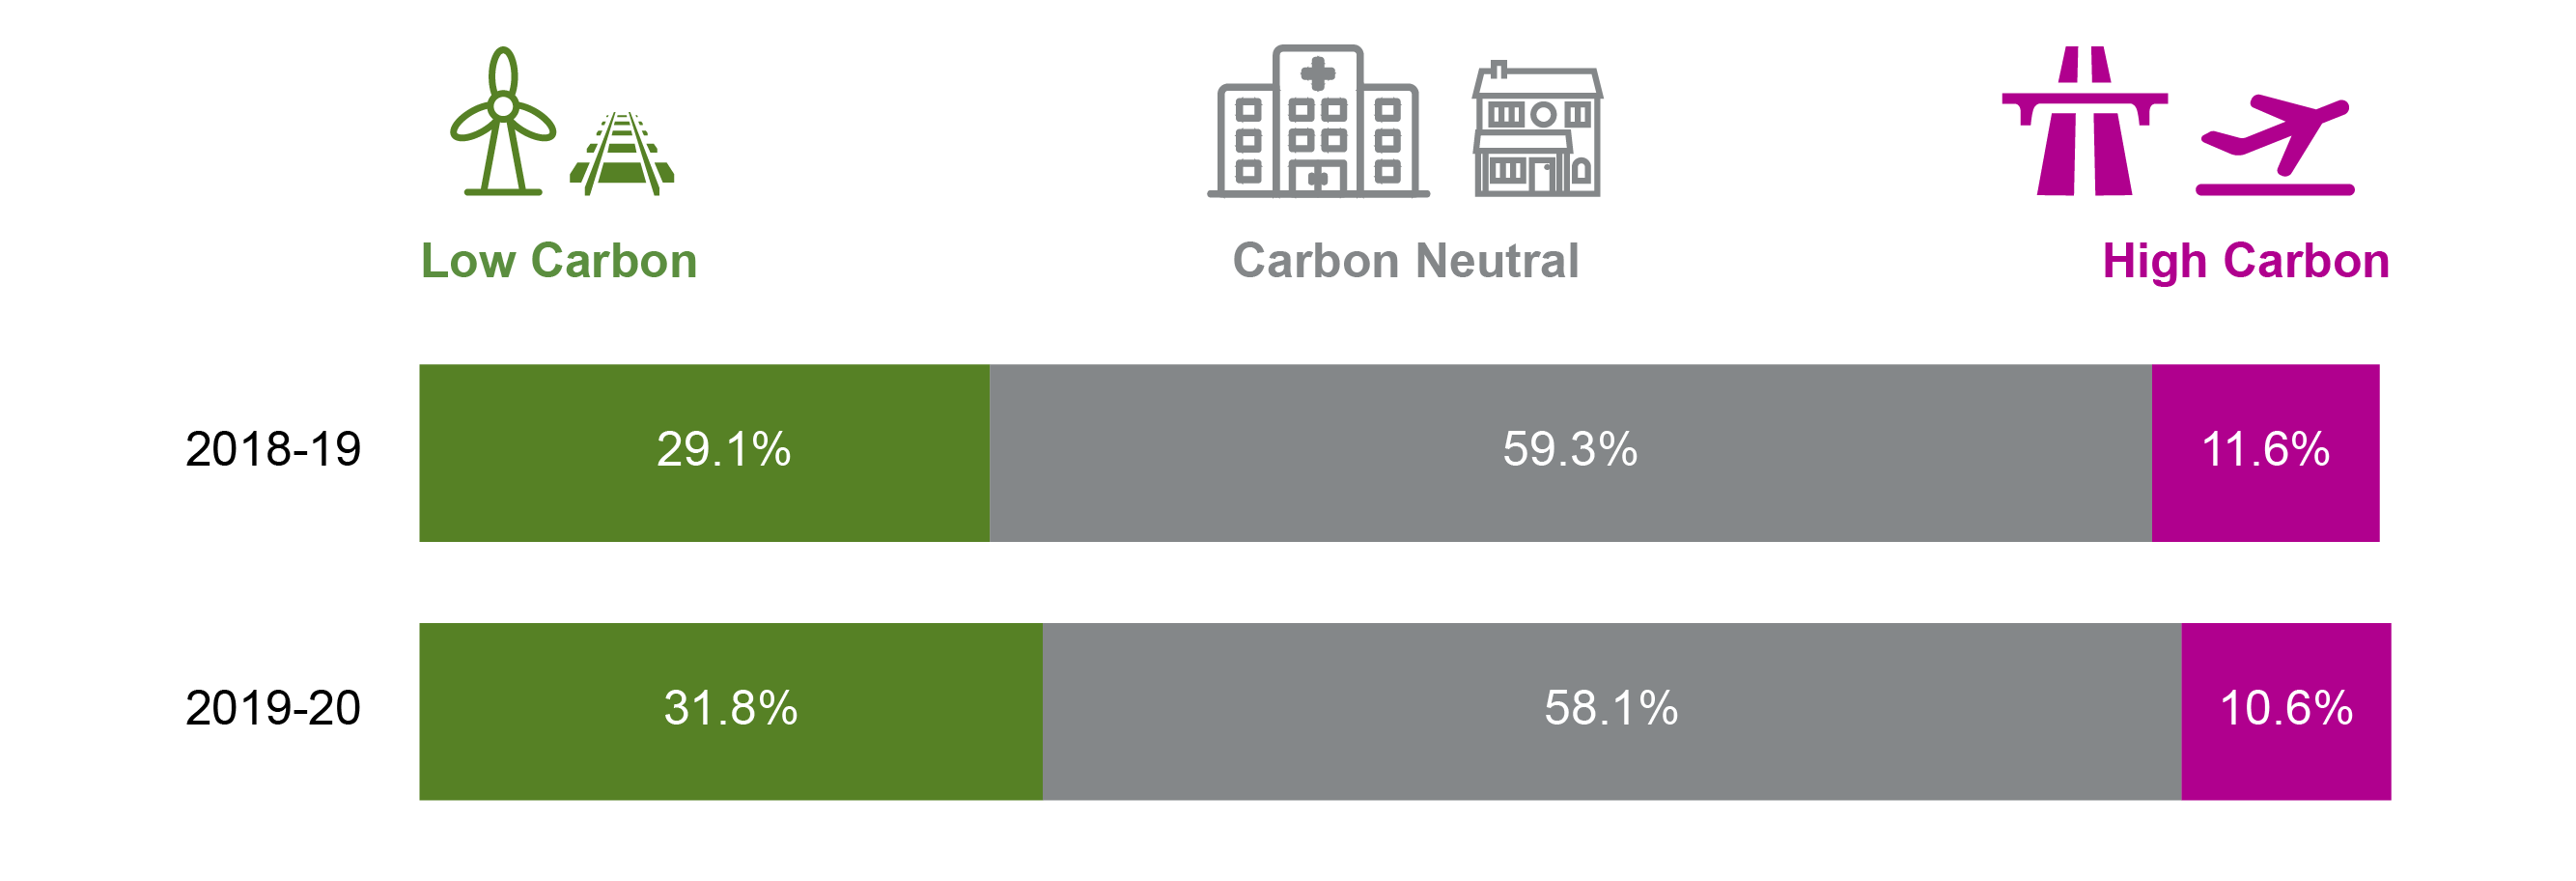 bar graphs showing the proportions of high, neutral or low carbon spend in financial years 2018-19 and 2019-20